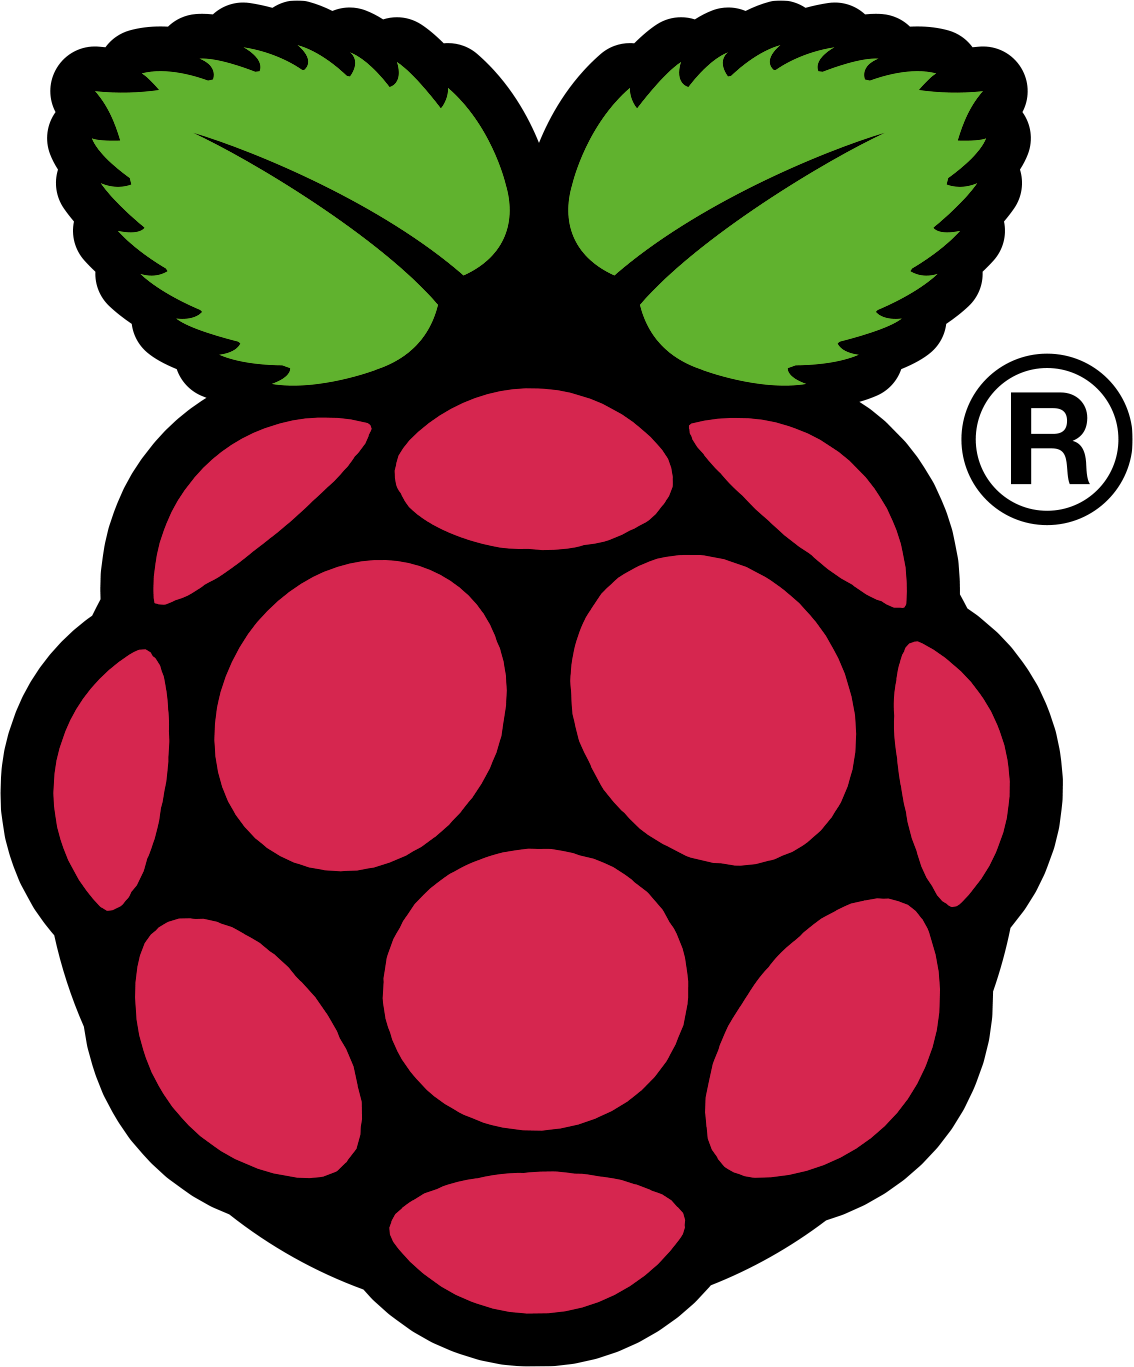 I Finally Got My Shipment Of Raspberry Pis Today And - Raspberry Pi Png (1134x1367)